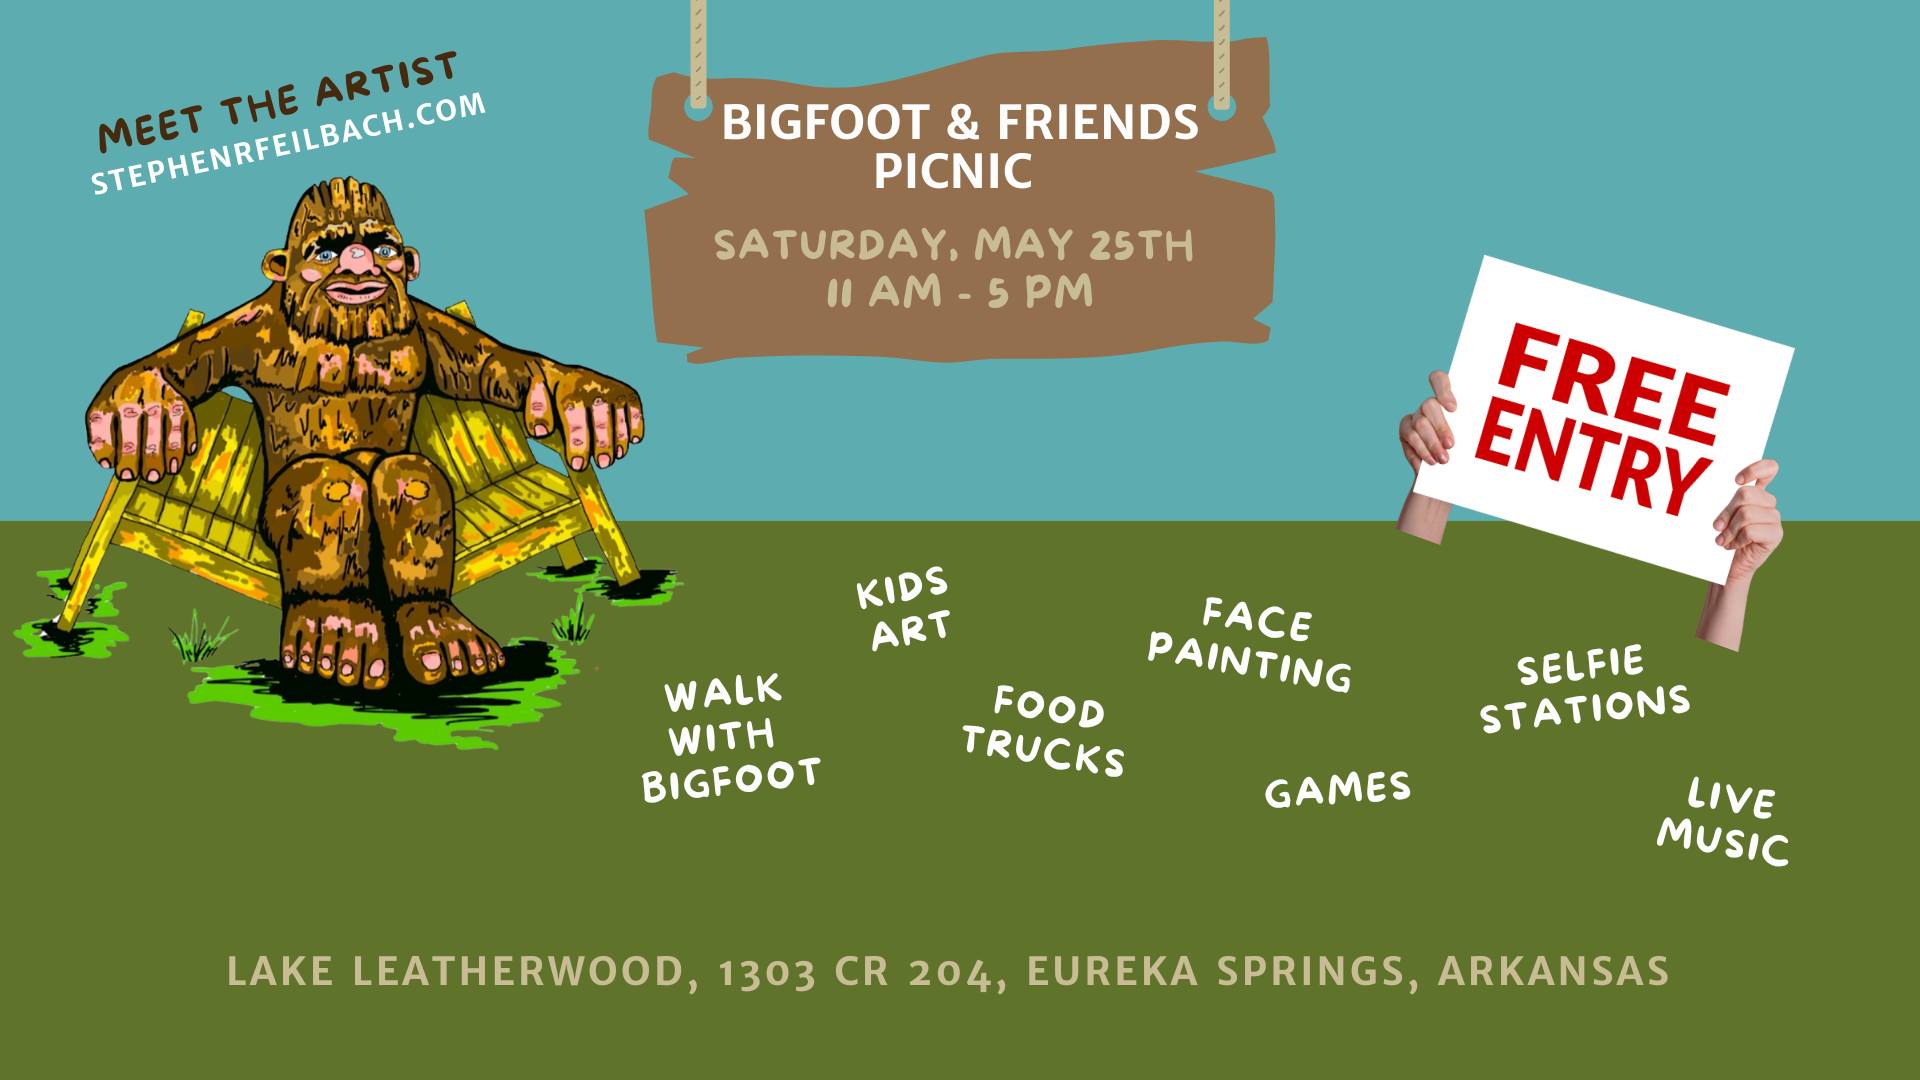 Featured image for “Bigfoot & Friends Picnic”